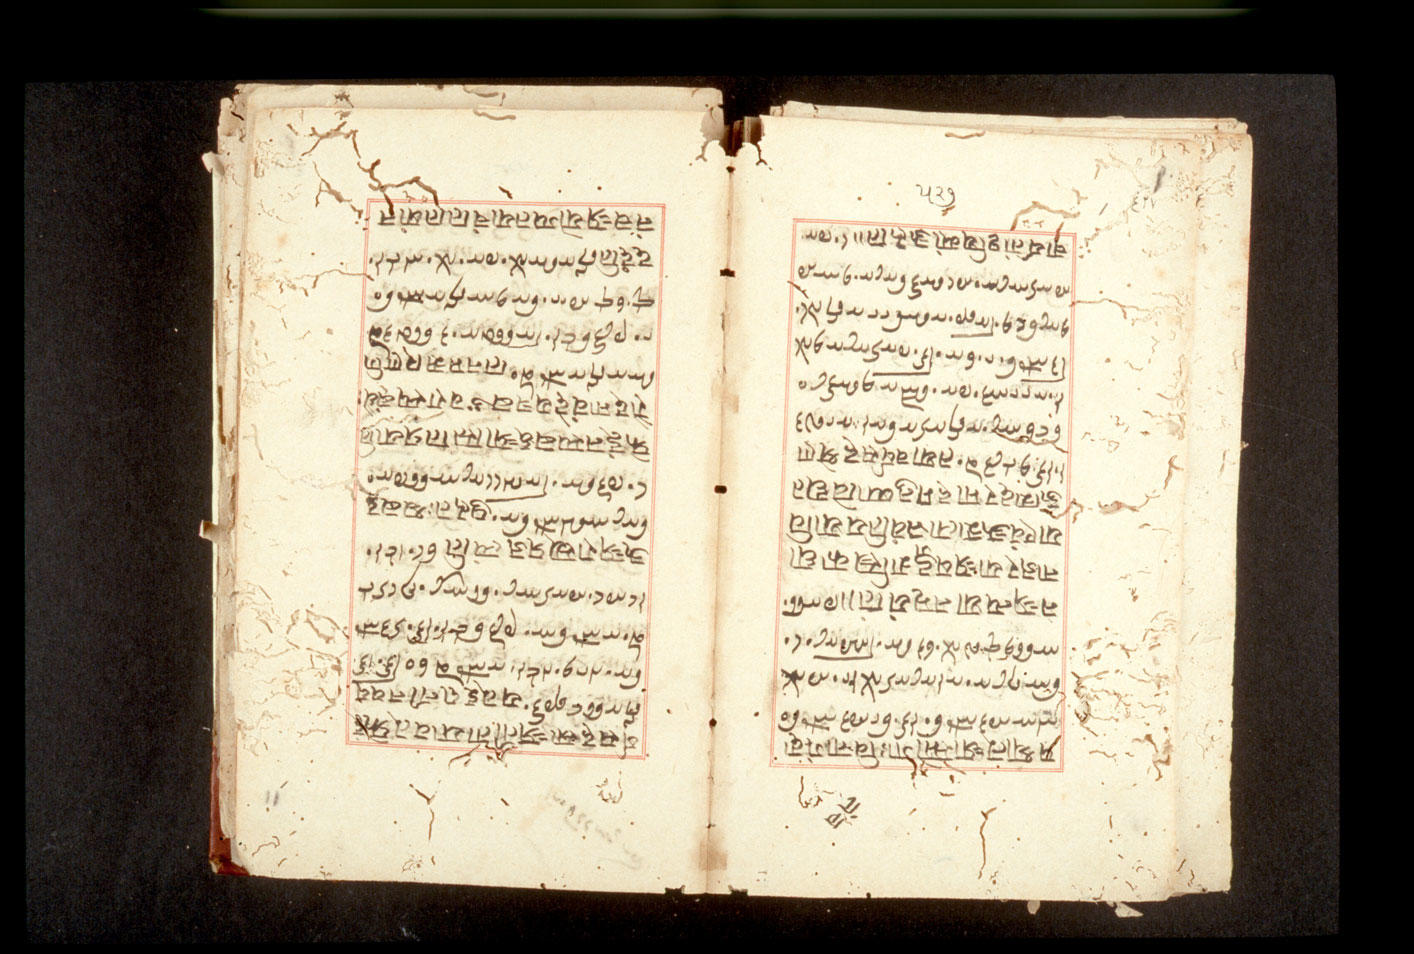 Folios 527v (right) and 528r (left)